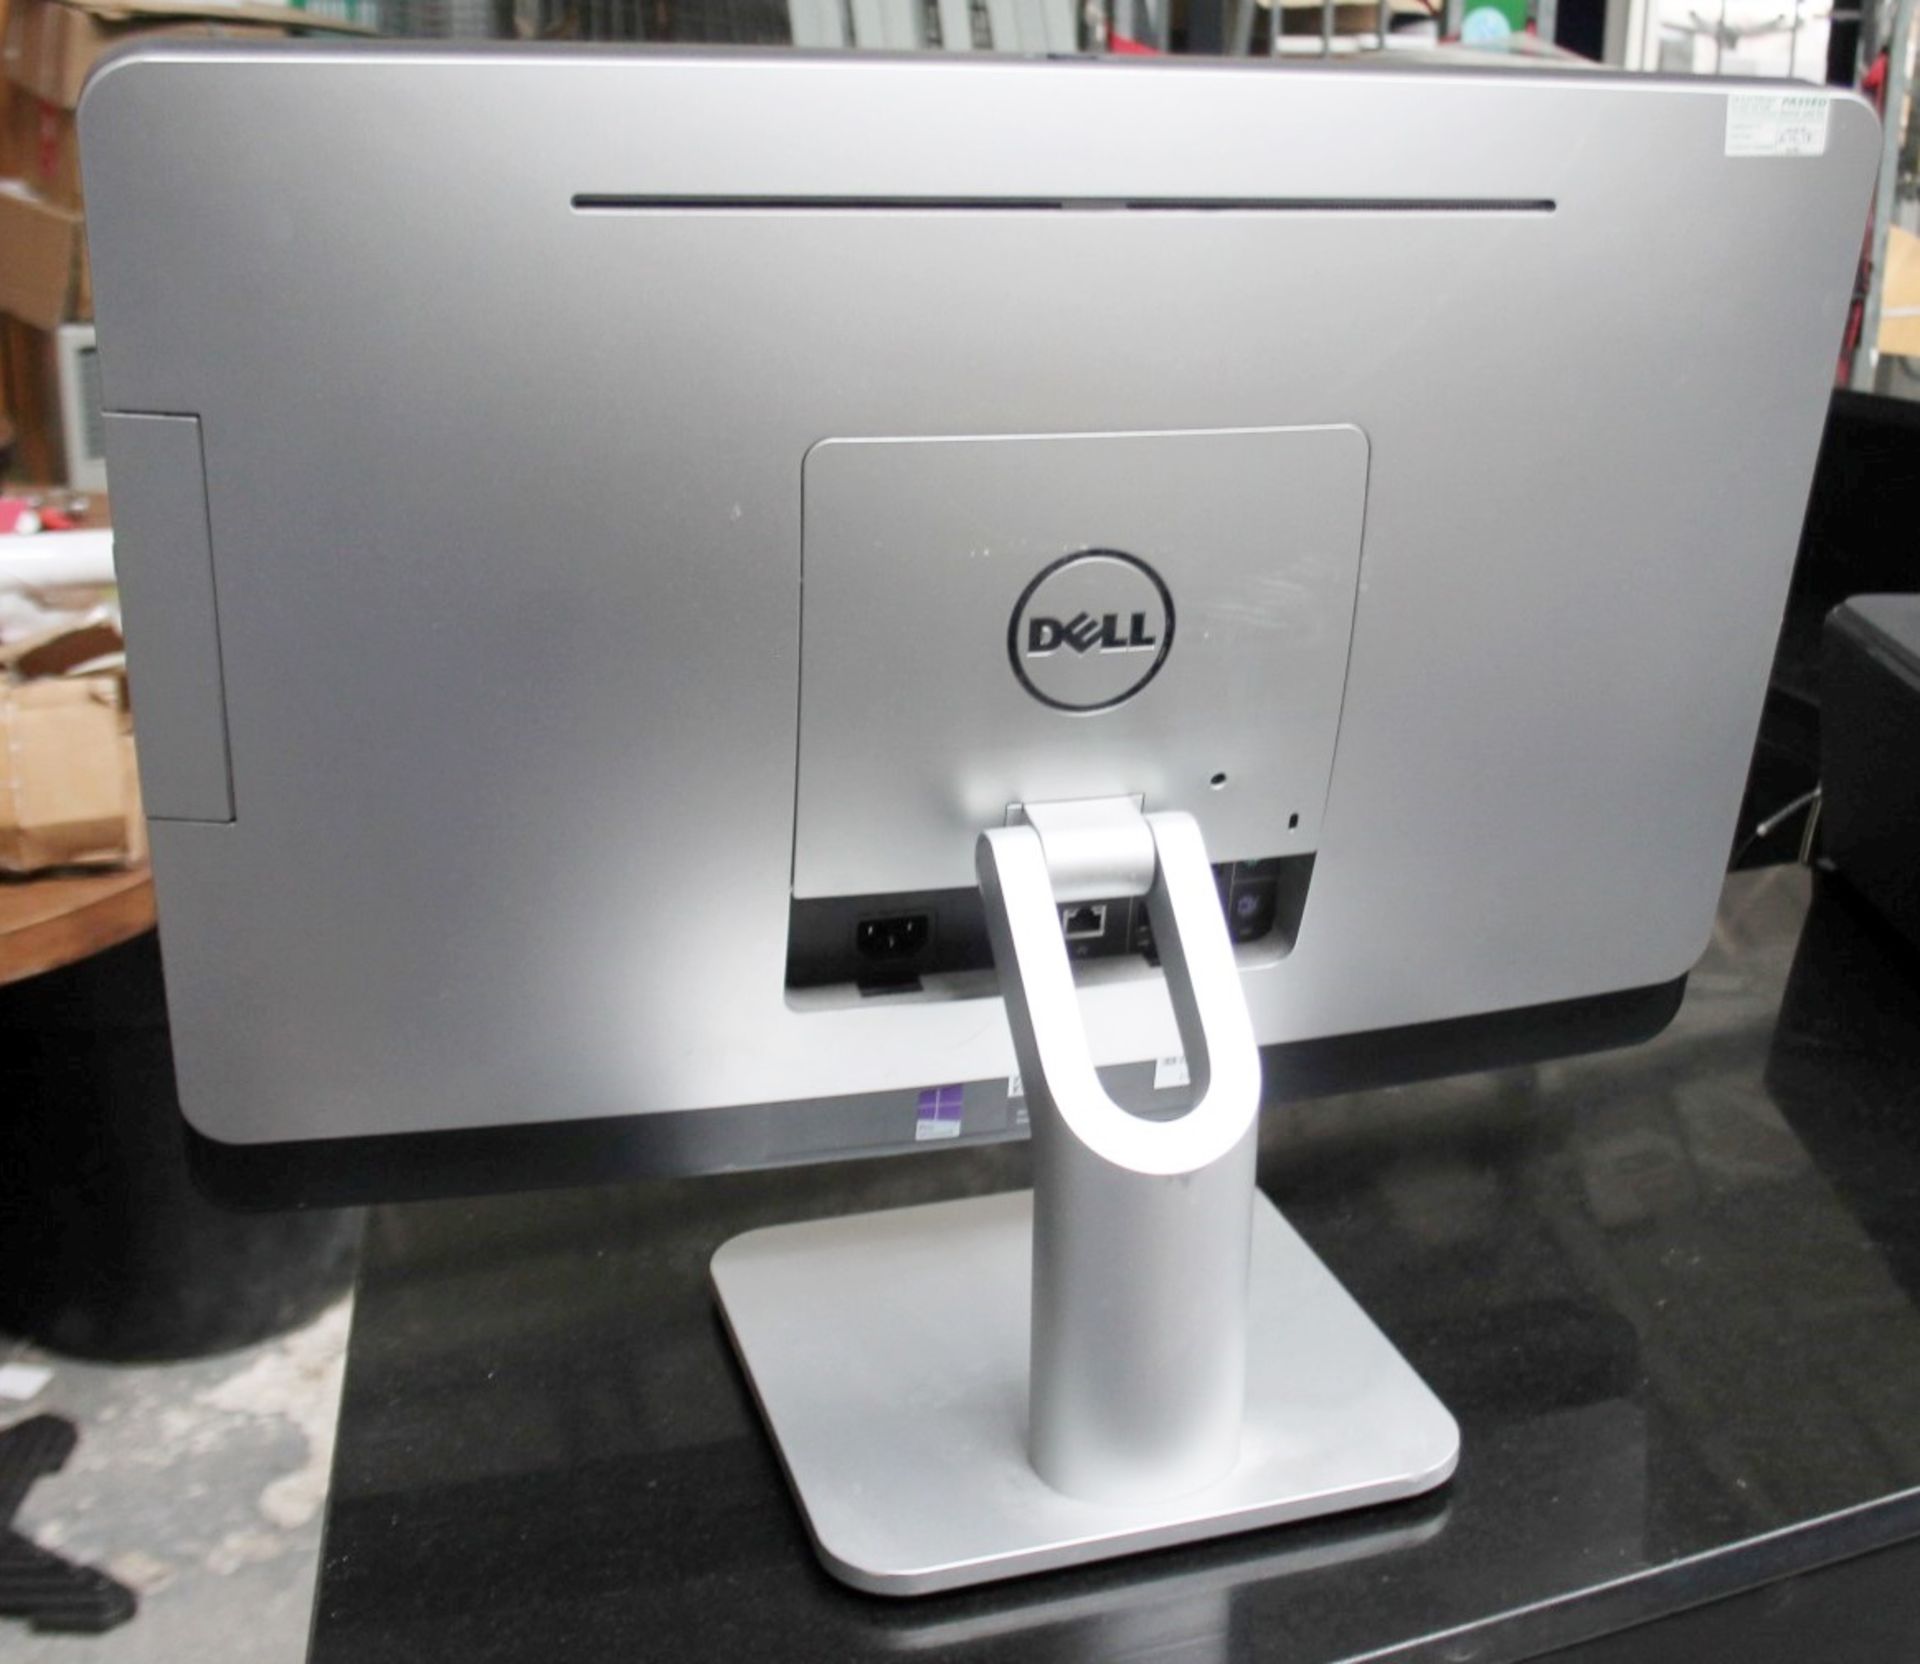 1 x Dell OptiPlex 9020 All-In-One PC, With HP Envy Printer / Scanner - Recently Removed From A - Image 4 of 14